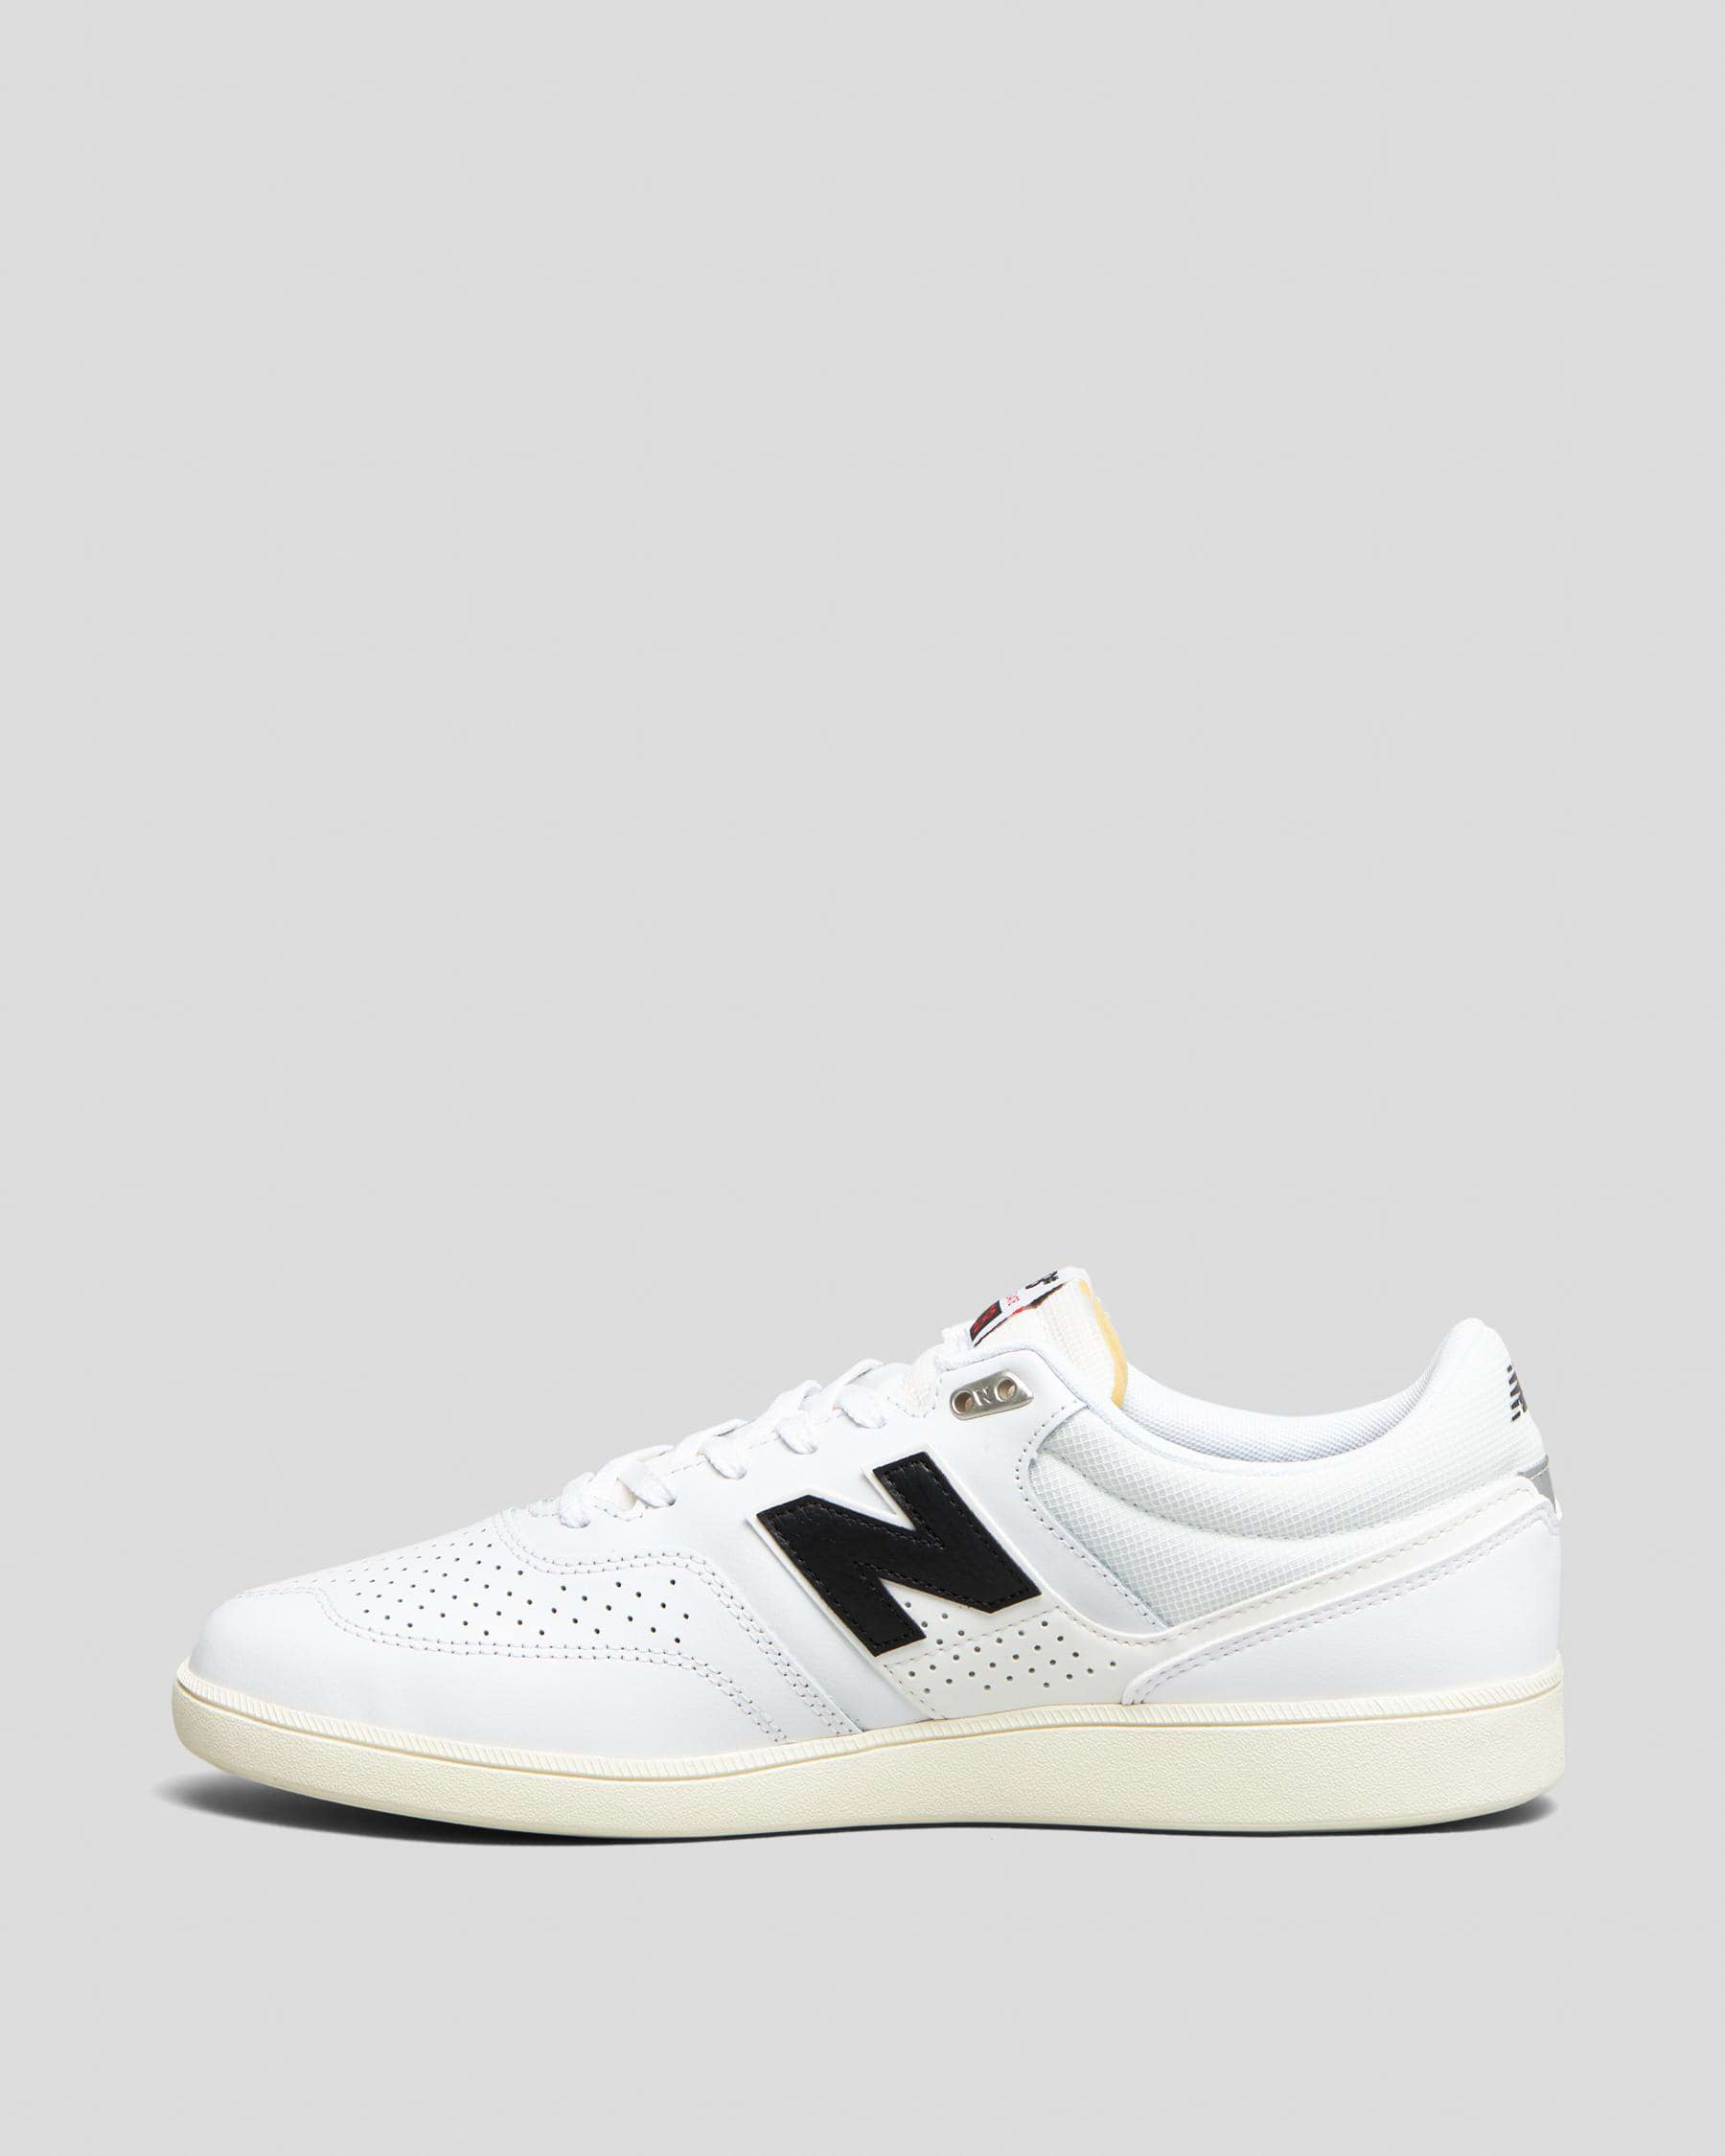 Shop New Balance NB 508 Shoes In White/black - Fast Shipping & Easy ...